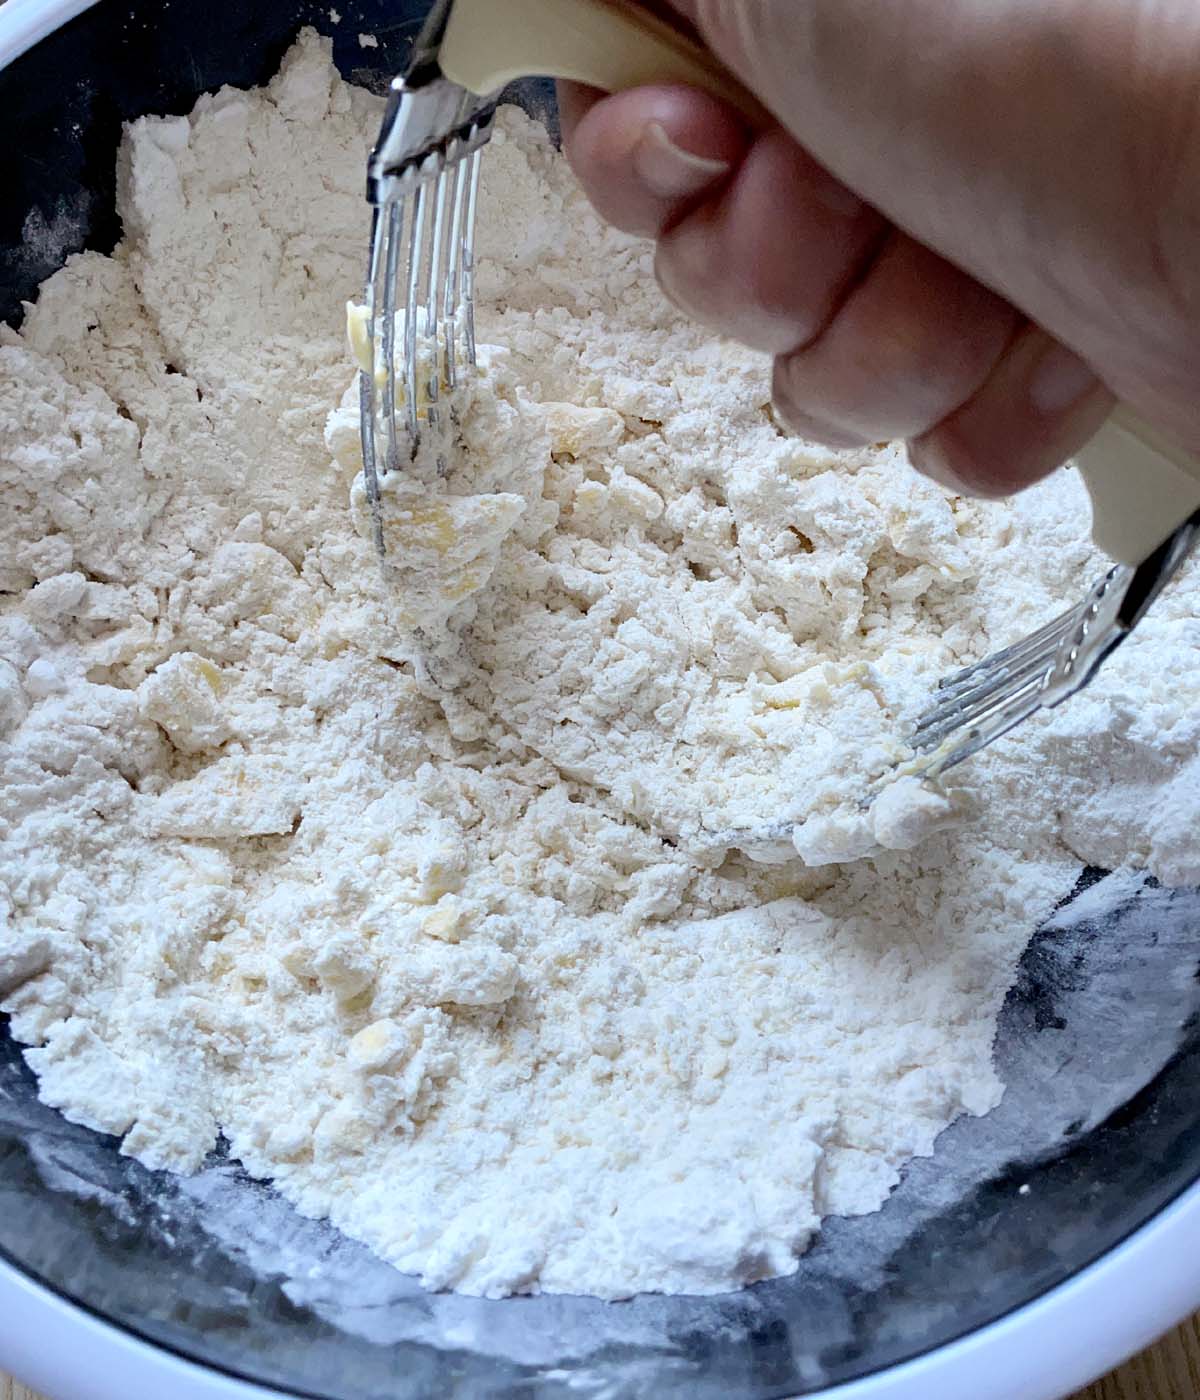 A hand holding a pastry cutter, cutting chunks of butter into dry flour ingredients in a black bowl.